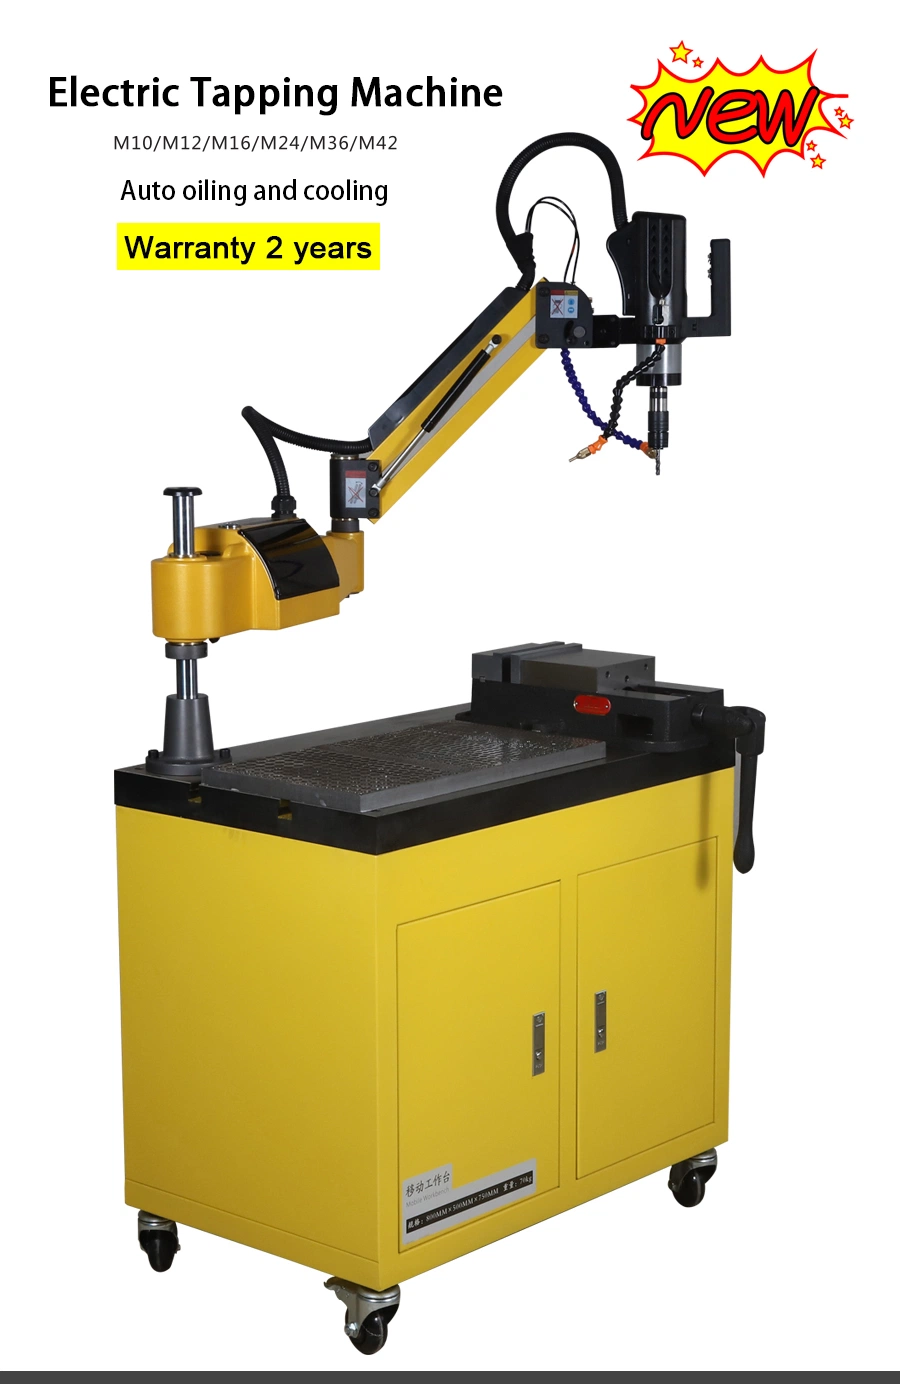 HD Touch Screeen Auto Oiling and Deslagging Tapping Machine